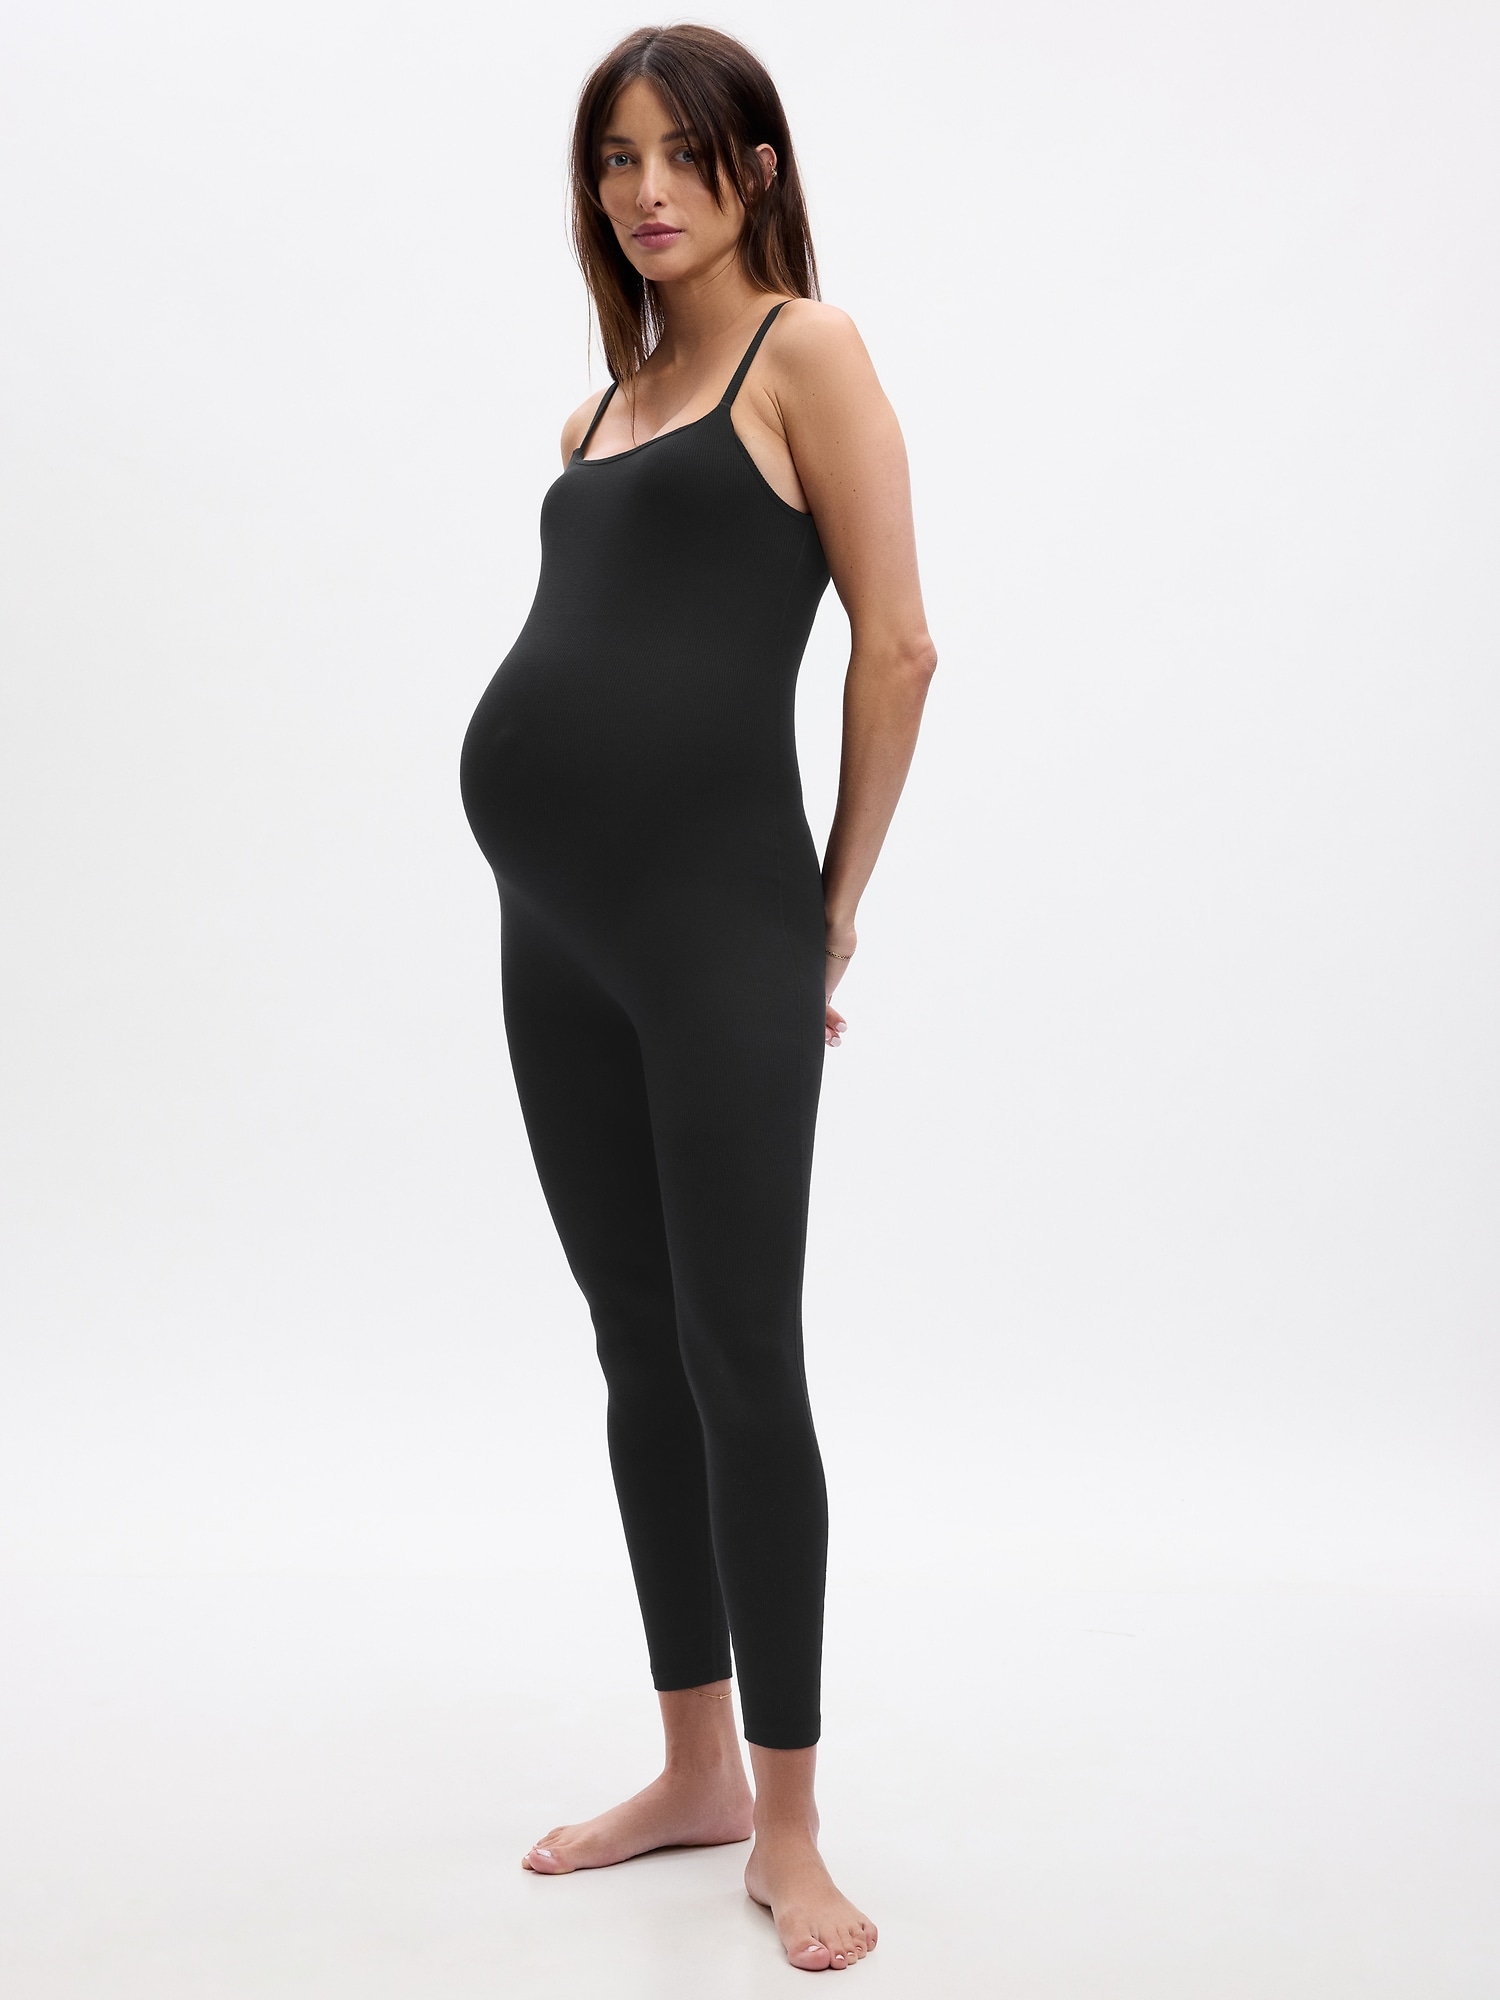 Soft Maternity Clothes